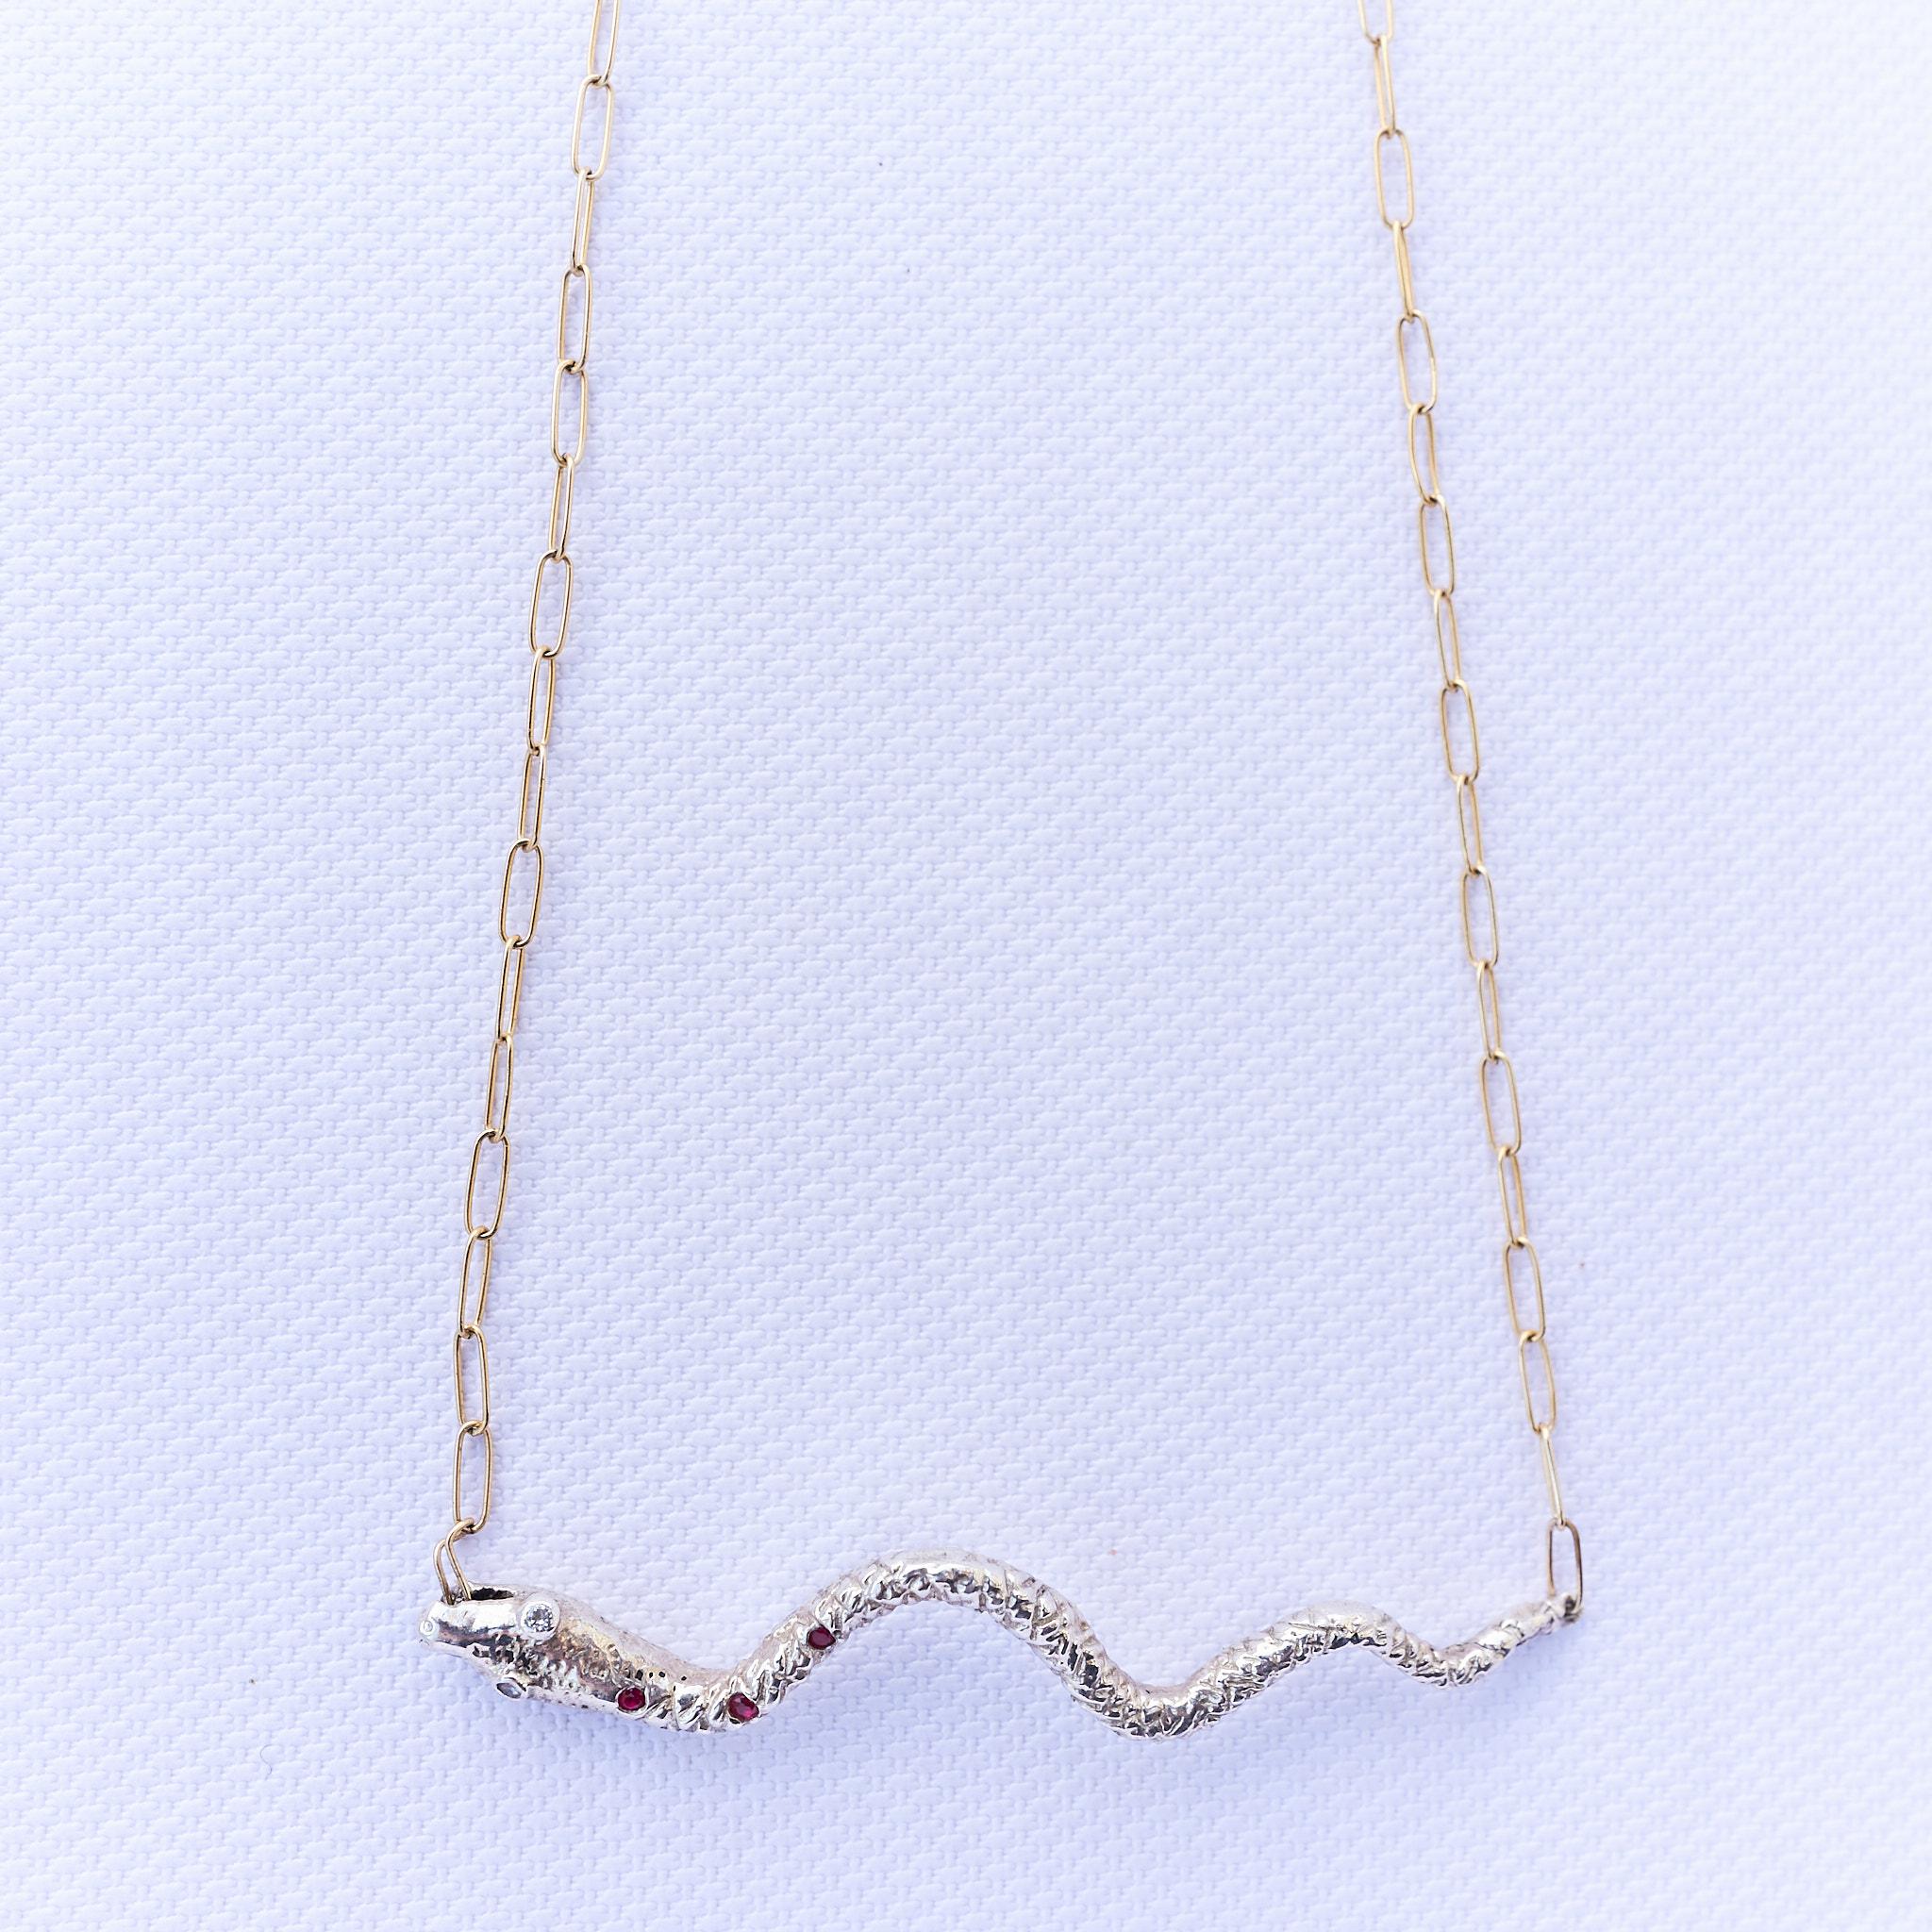 Round Cut Snake Necklace Silver Ruby Iolite Gold Filled Chain J Dauphin For Sale